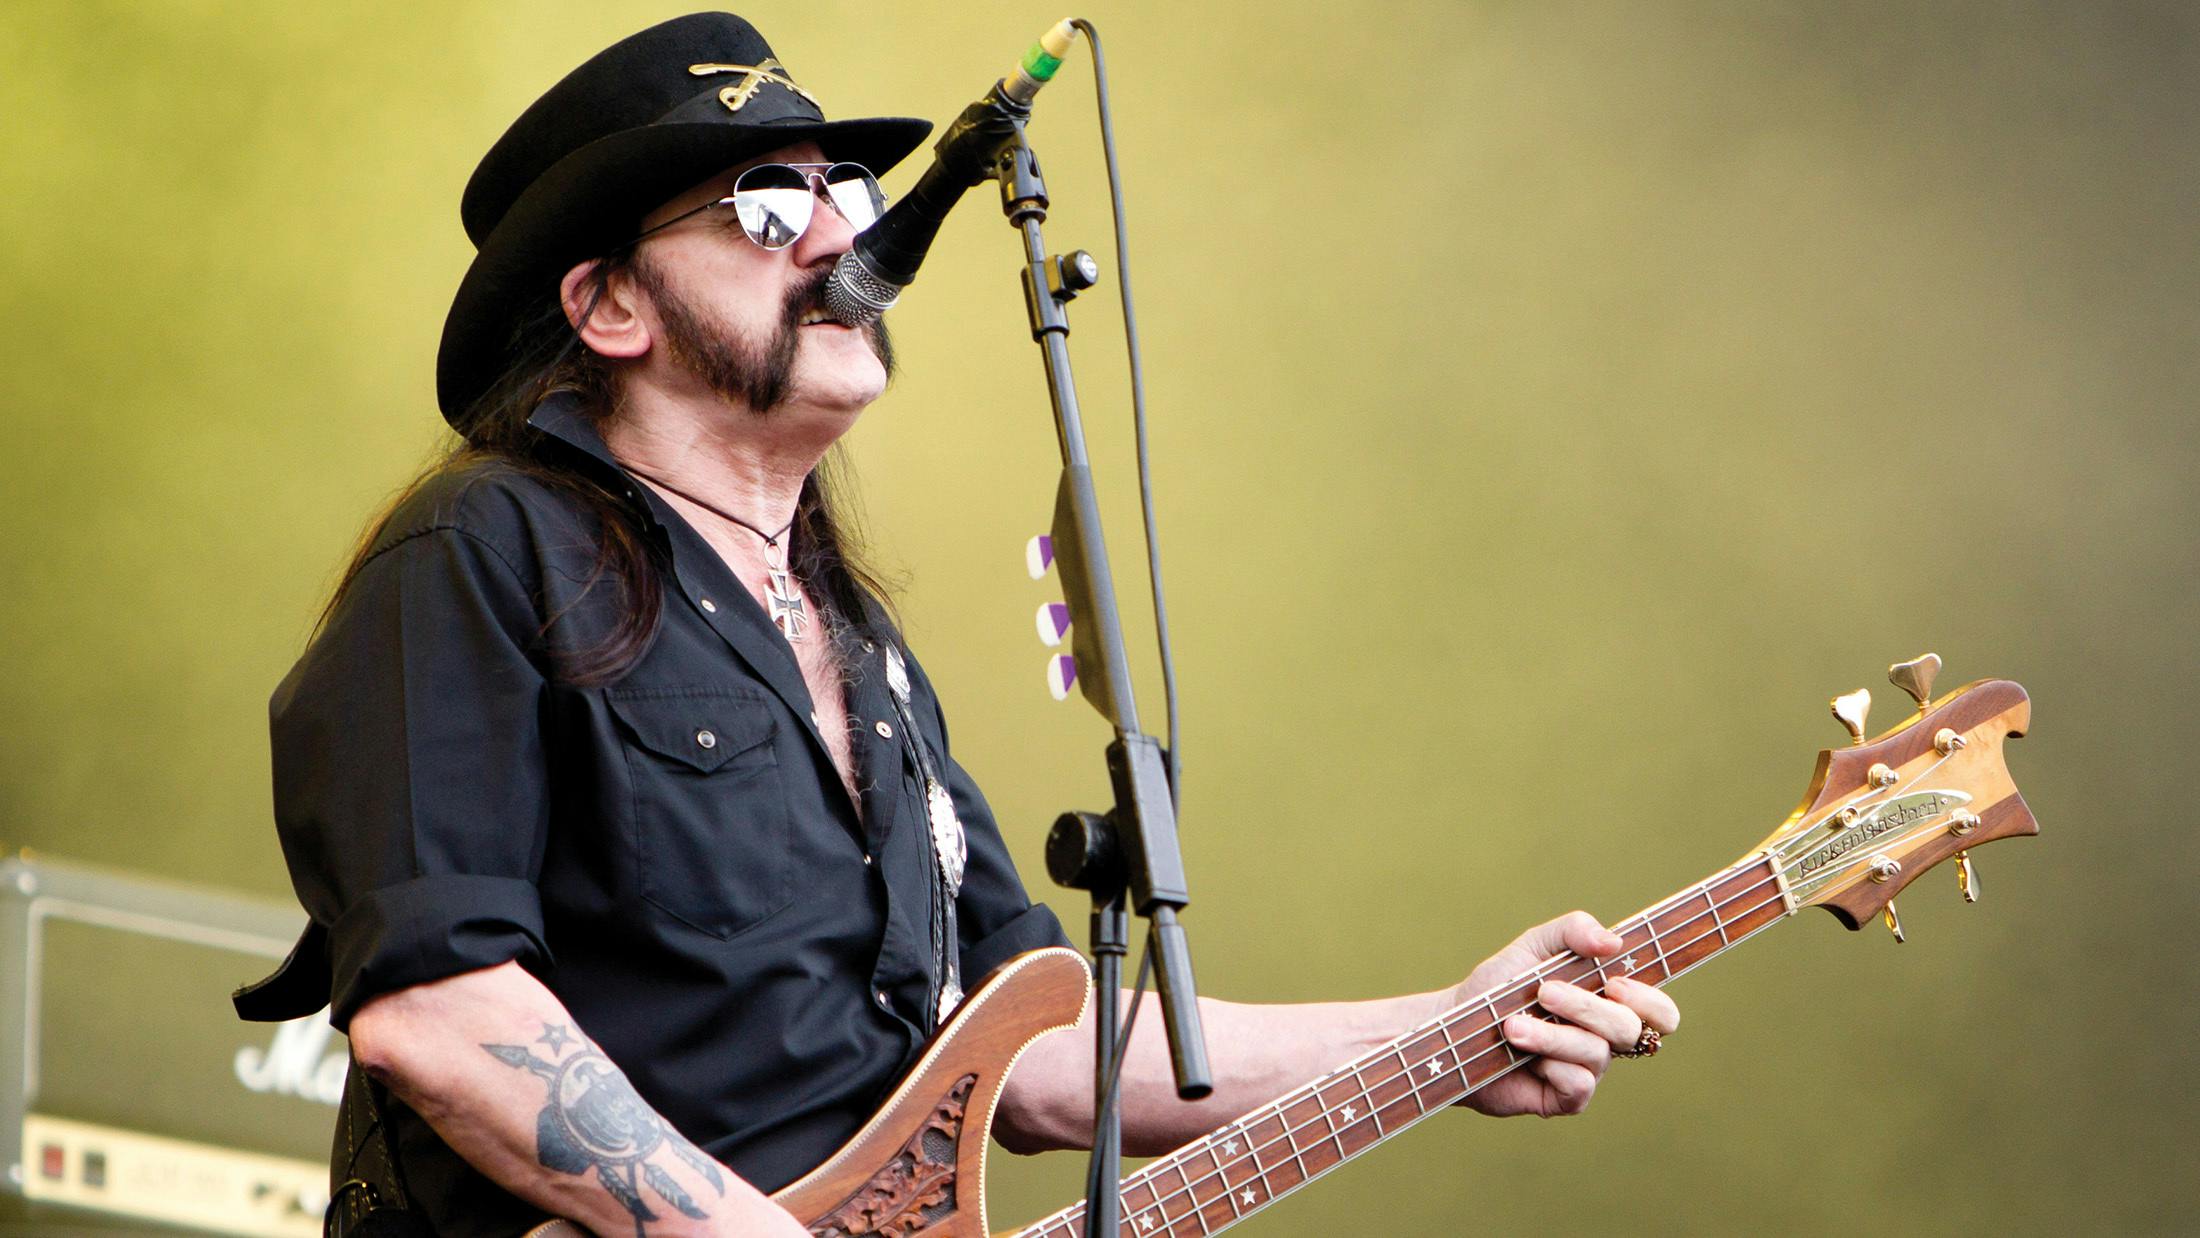 Motörhead have just announced their 14th live album, Louder Than Noise… Live In Berlin